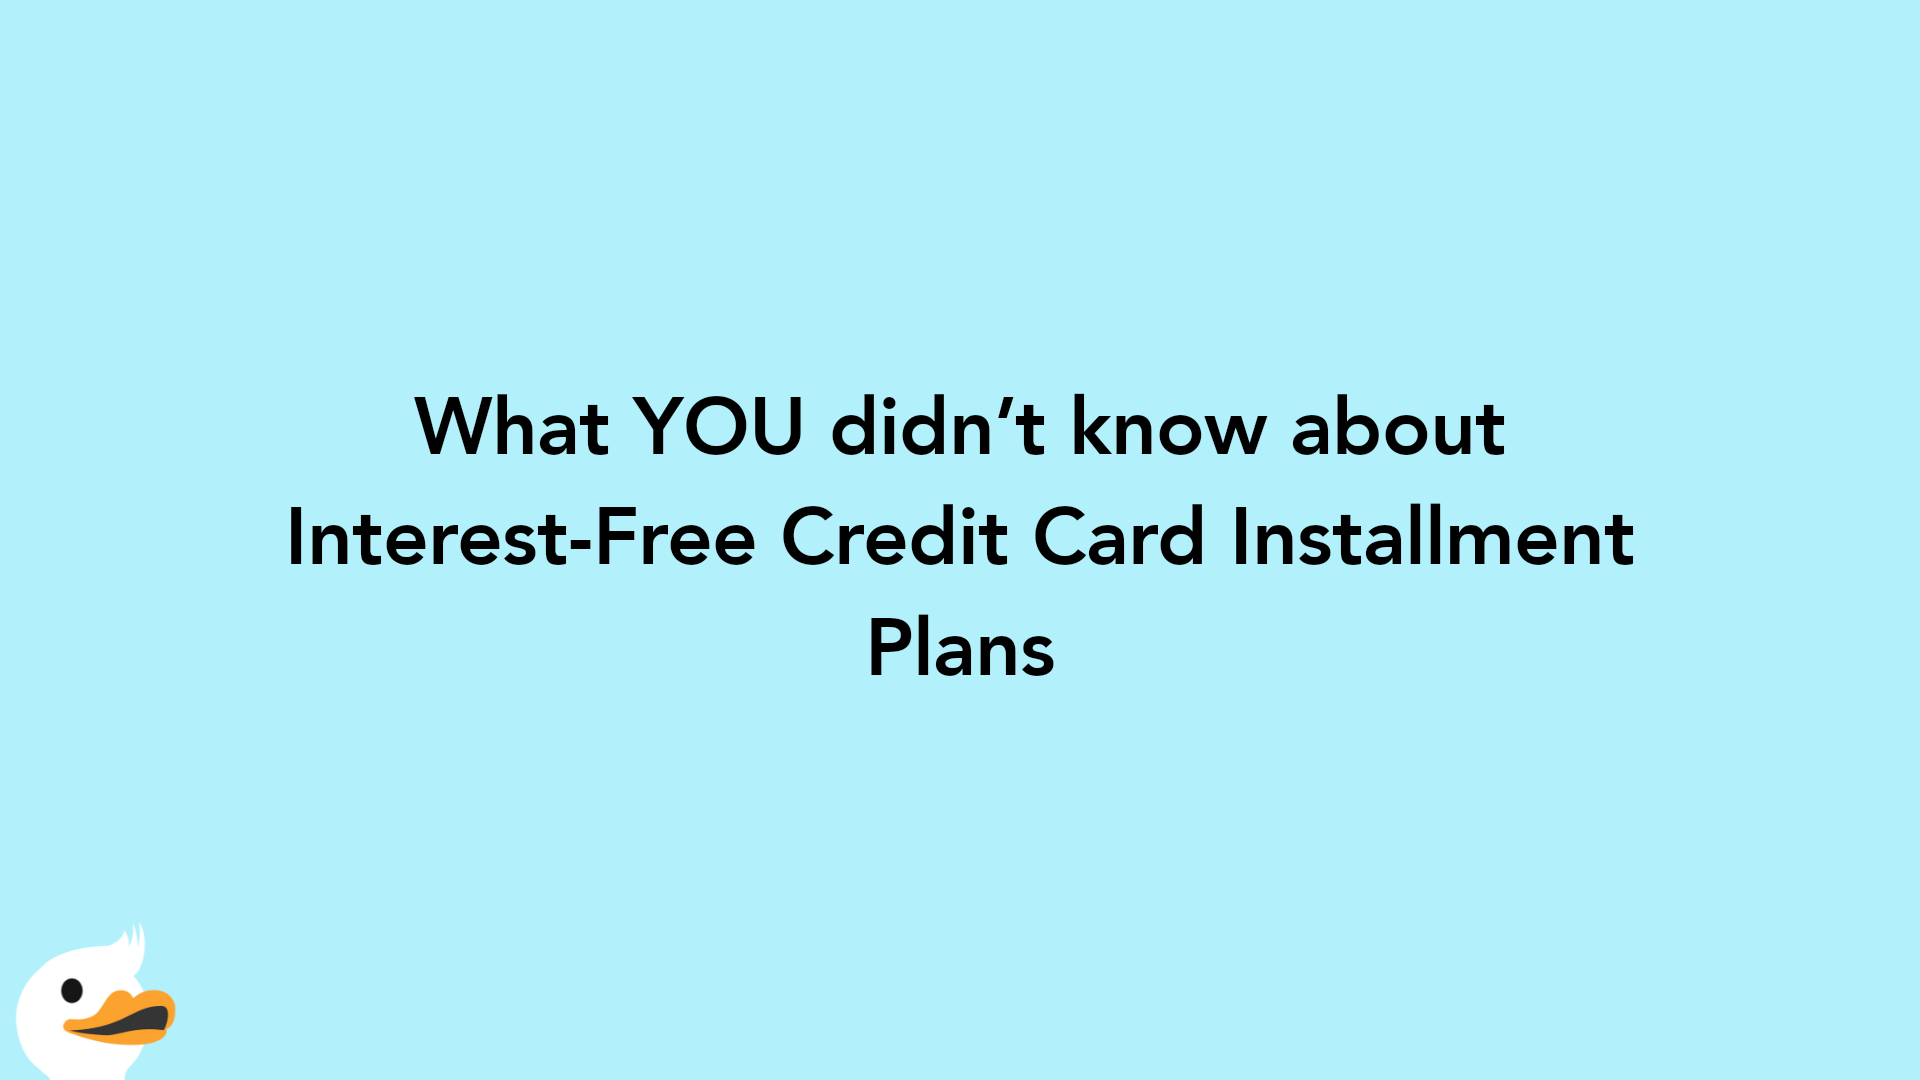 What YOU didn’t know about Interest-Free Credit Card Installment Plans